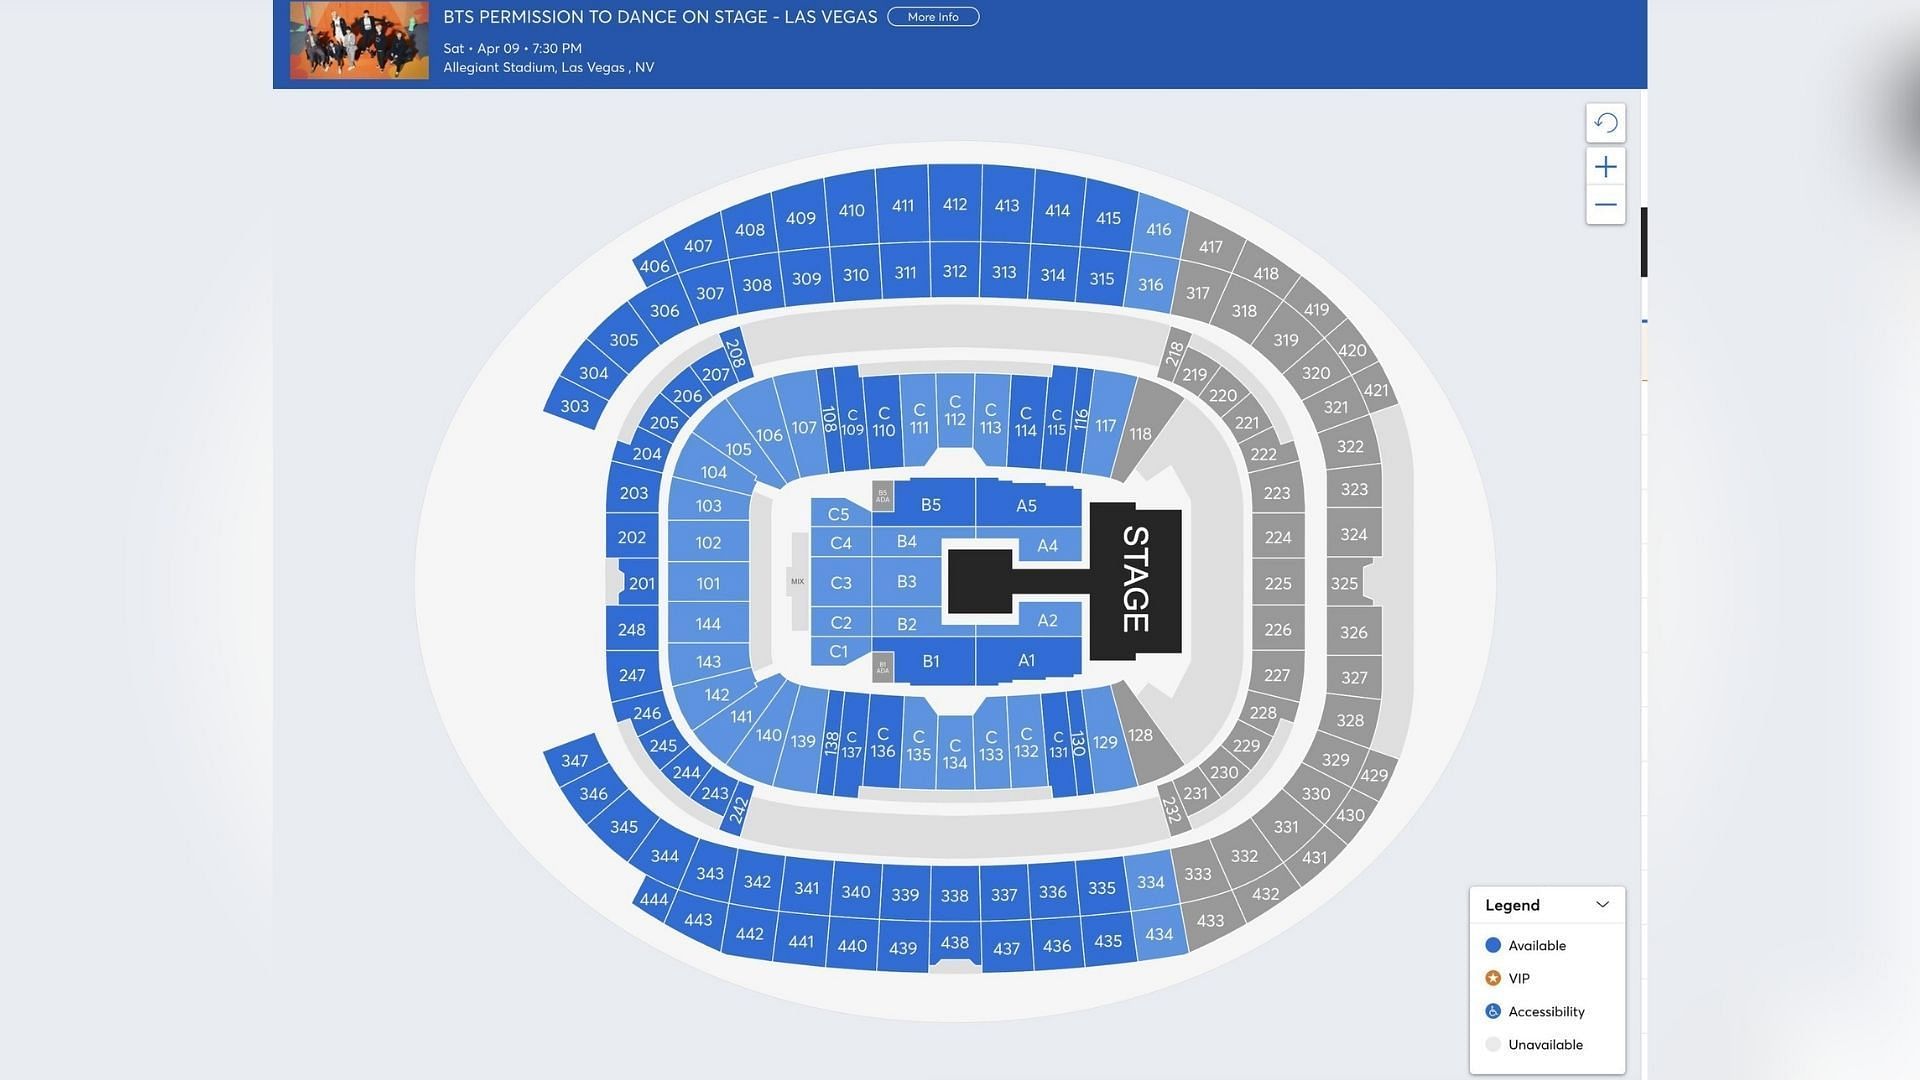 Oracle Arena Seating Chart Concert Bts